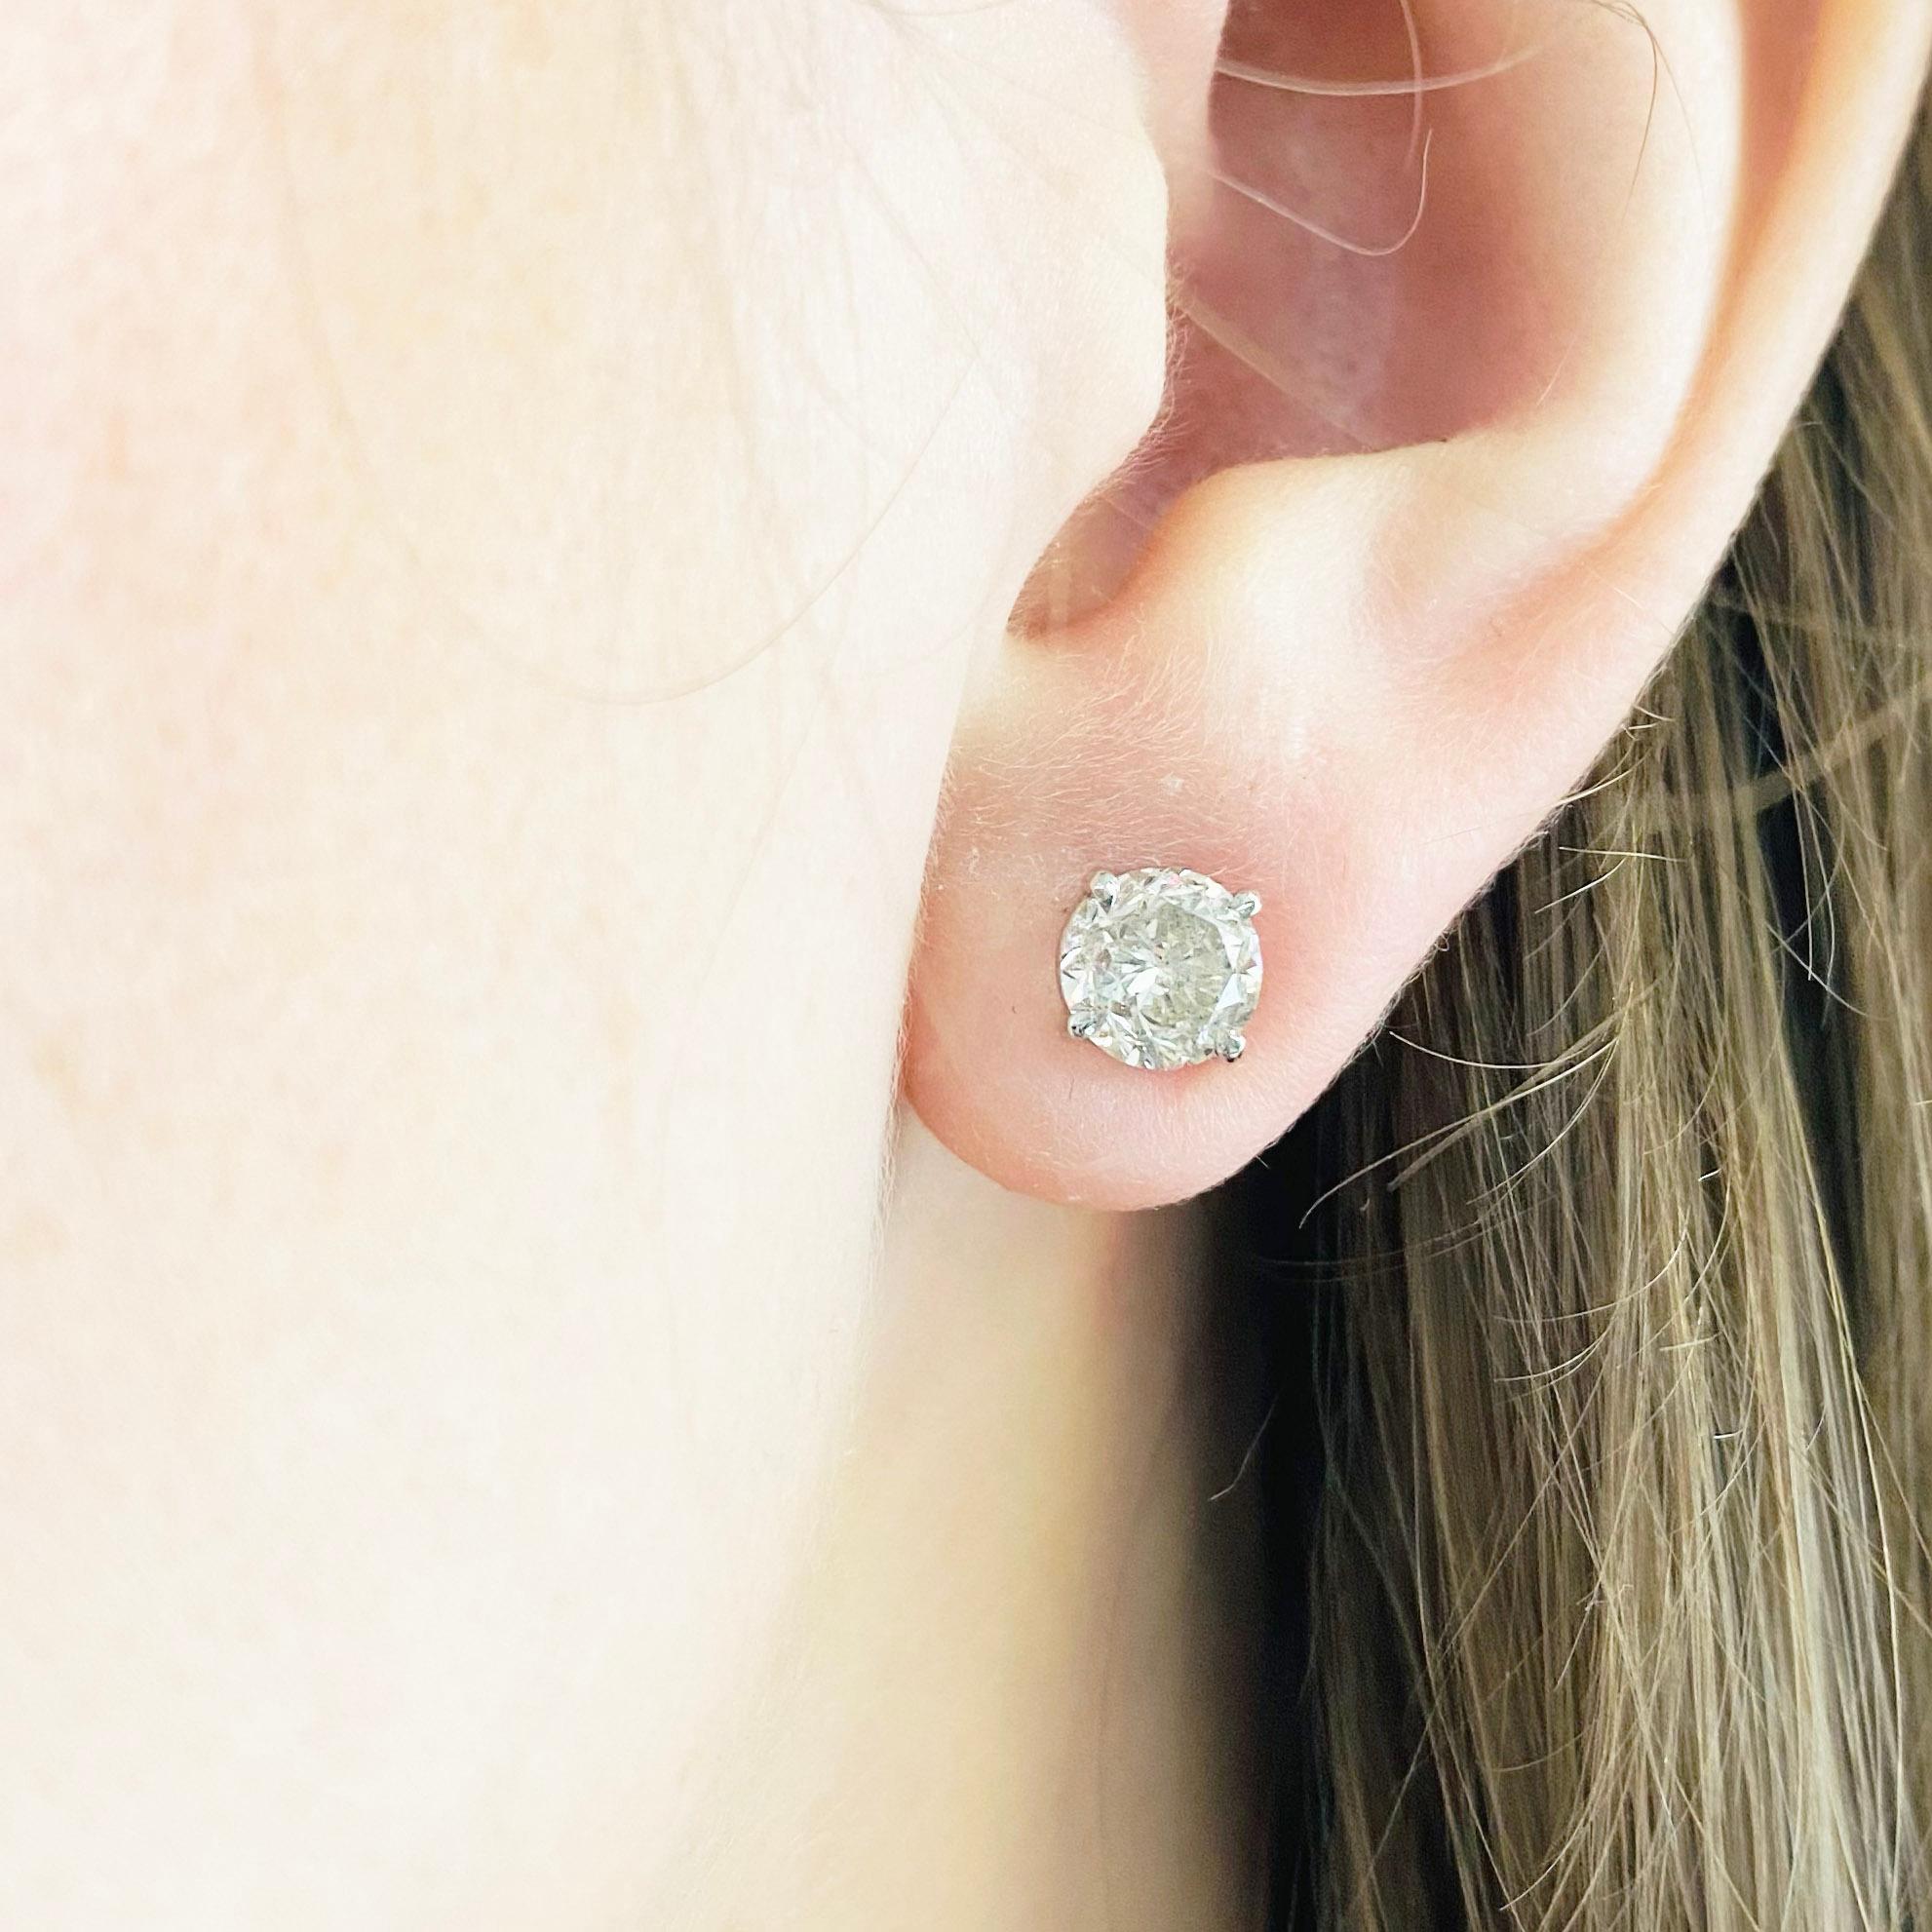 These stunning 14k white gold round diamond stud earrings provide a look that is both trendy and classic. These diamond earrings are a great staple to add to your collection, and can be worn with both casual and formal wear.  These earrings would